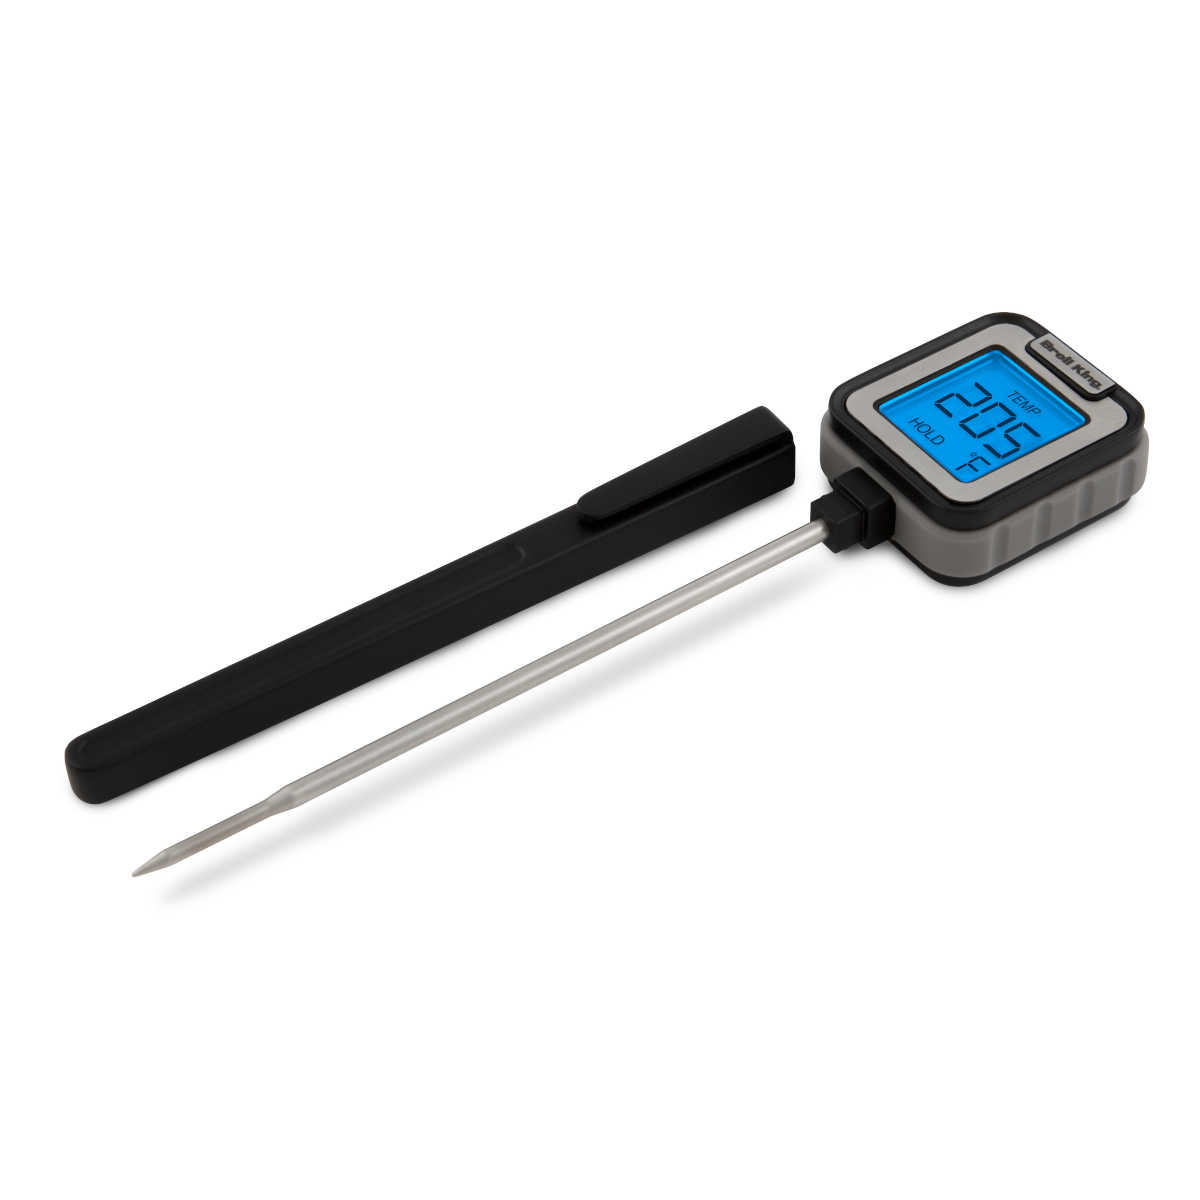 Broil King Instant Thermometer, Einstichthermometer